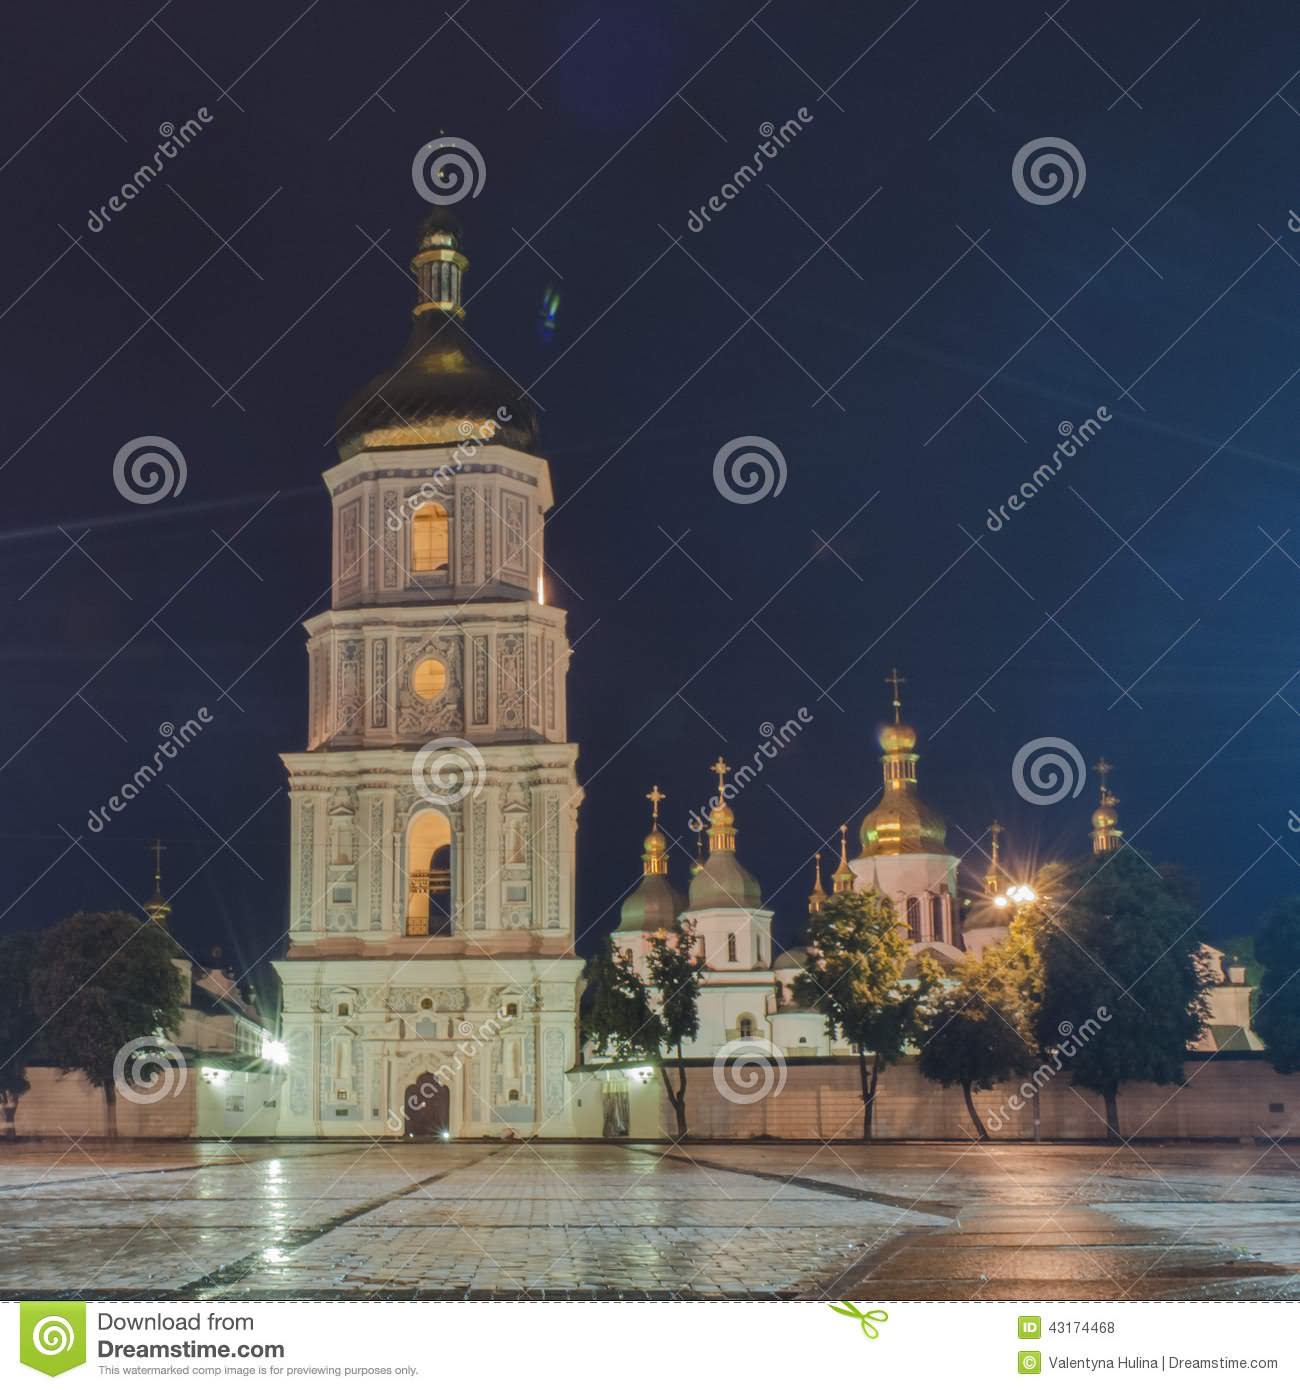 The Bell Tower Of The Saint Sophia Cathedral At Night